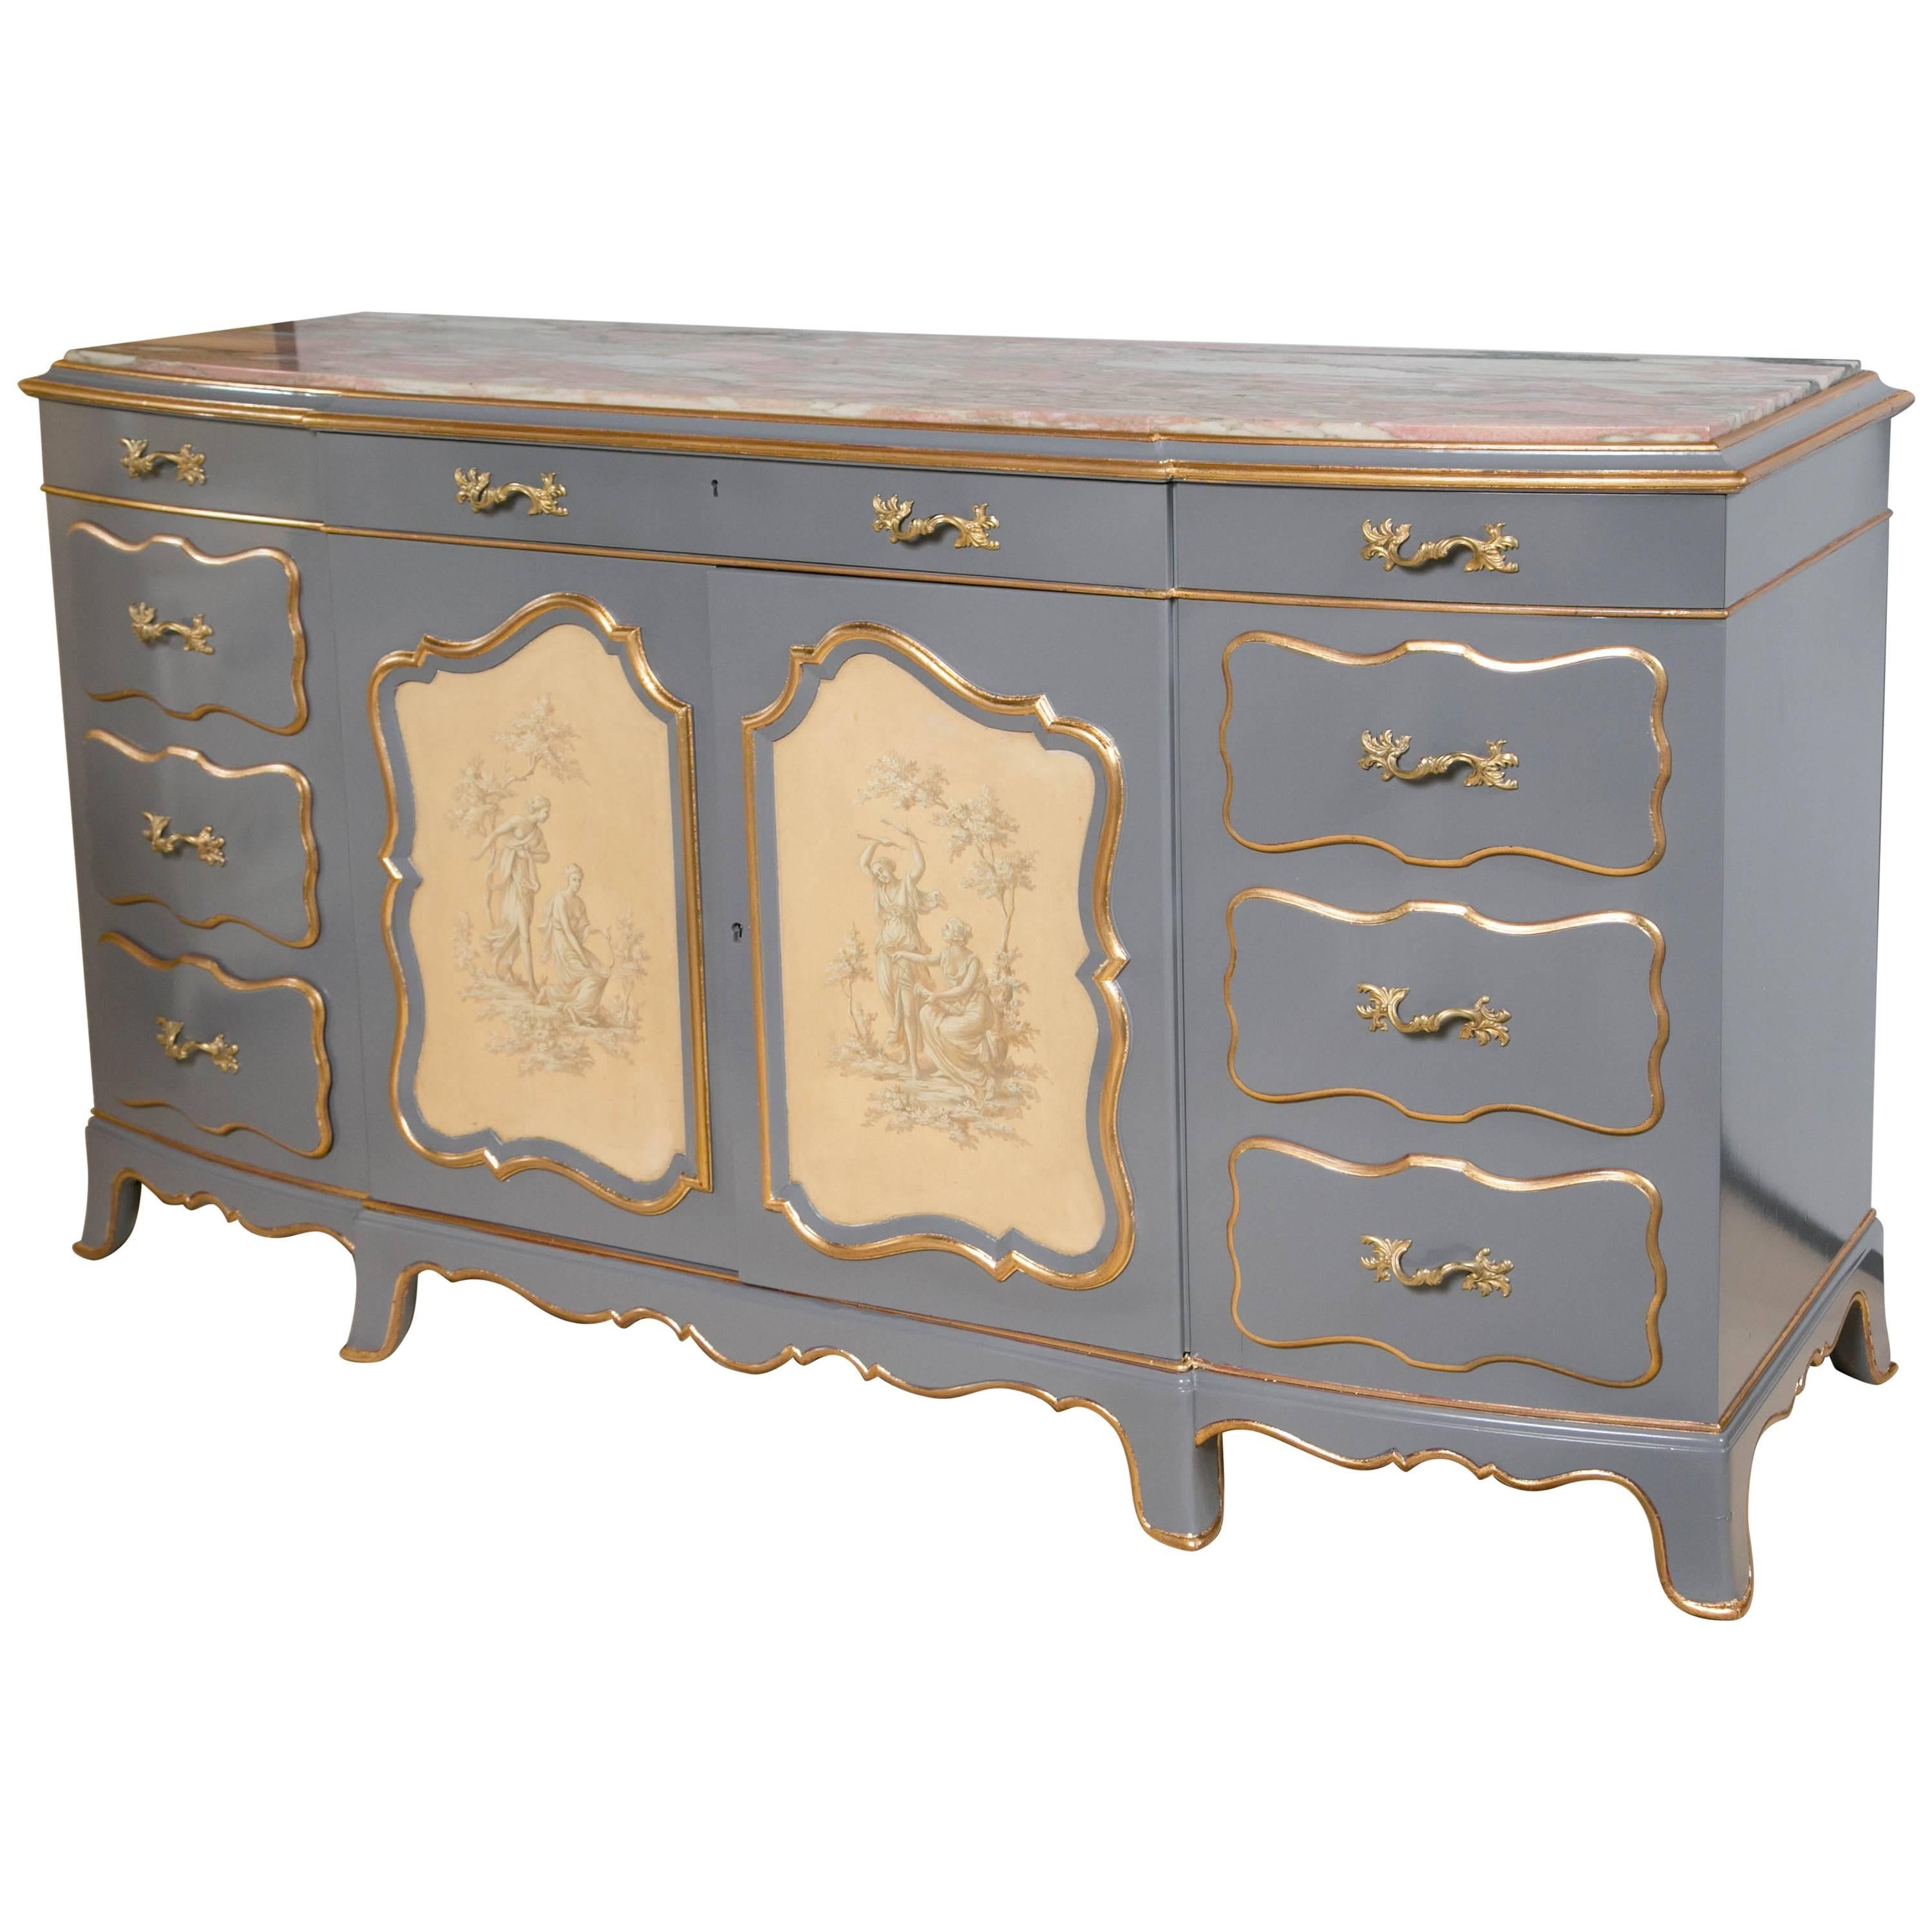 Venetian Marble-Top Painted Hollywood Regency Style Sideboard A One Of A Kind